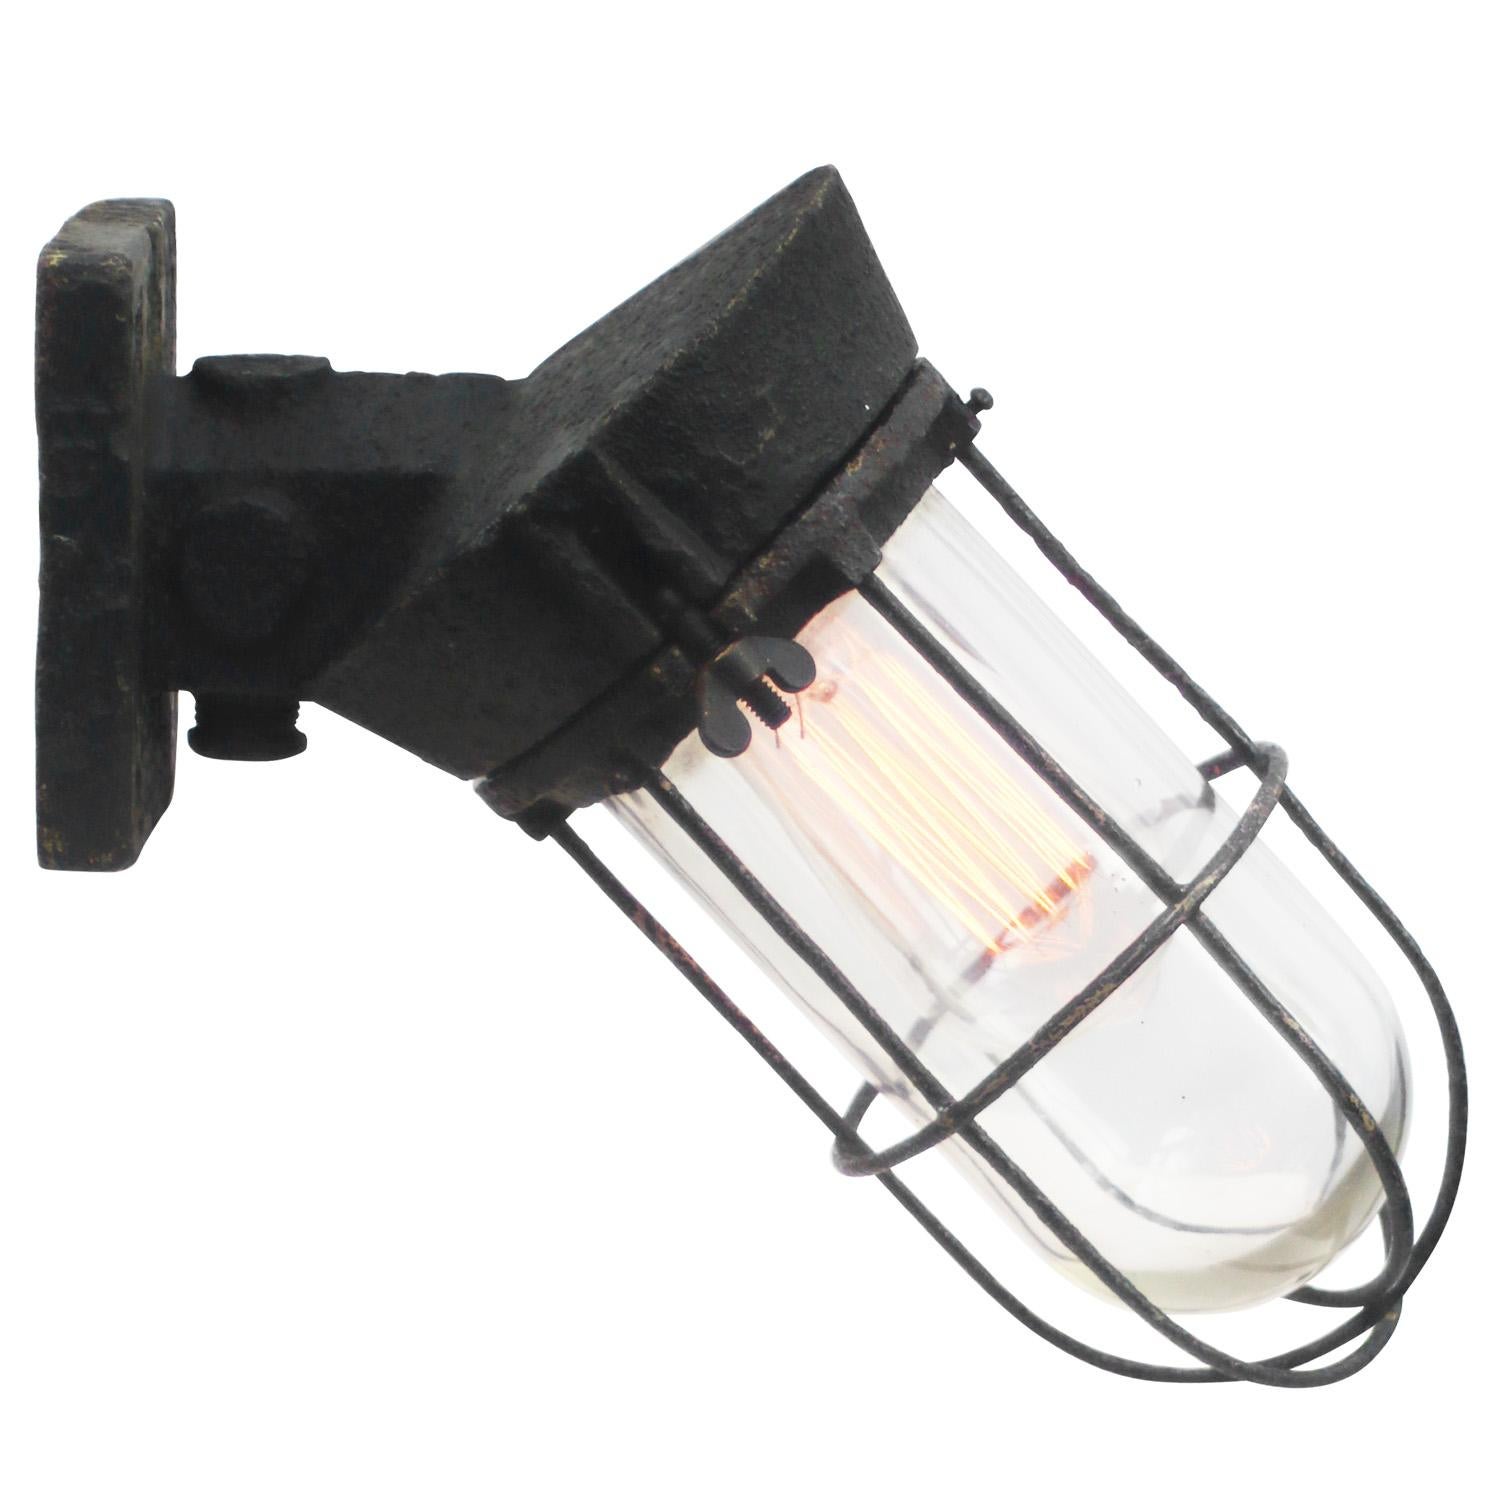 Dutch Industrial wall lamp made by ‘Industria Rotterdam’
Black cast iron with clear glass

Weight: 4.00 kg / 8.8 lb

Priced per individual item. All lamps have been made suitable by international standards for incandescent light bulbs,